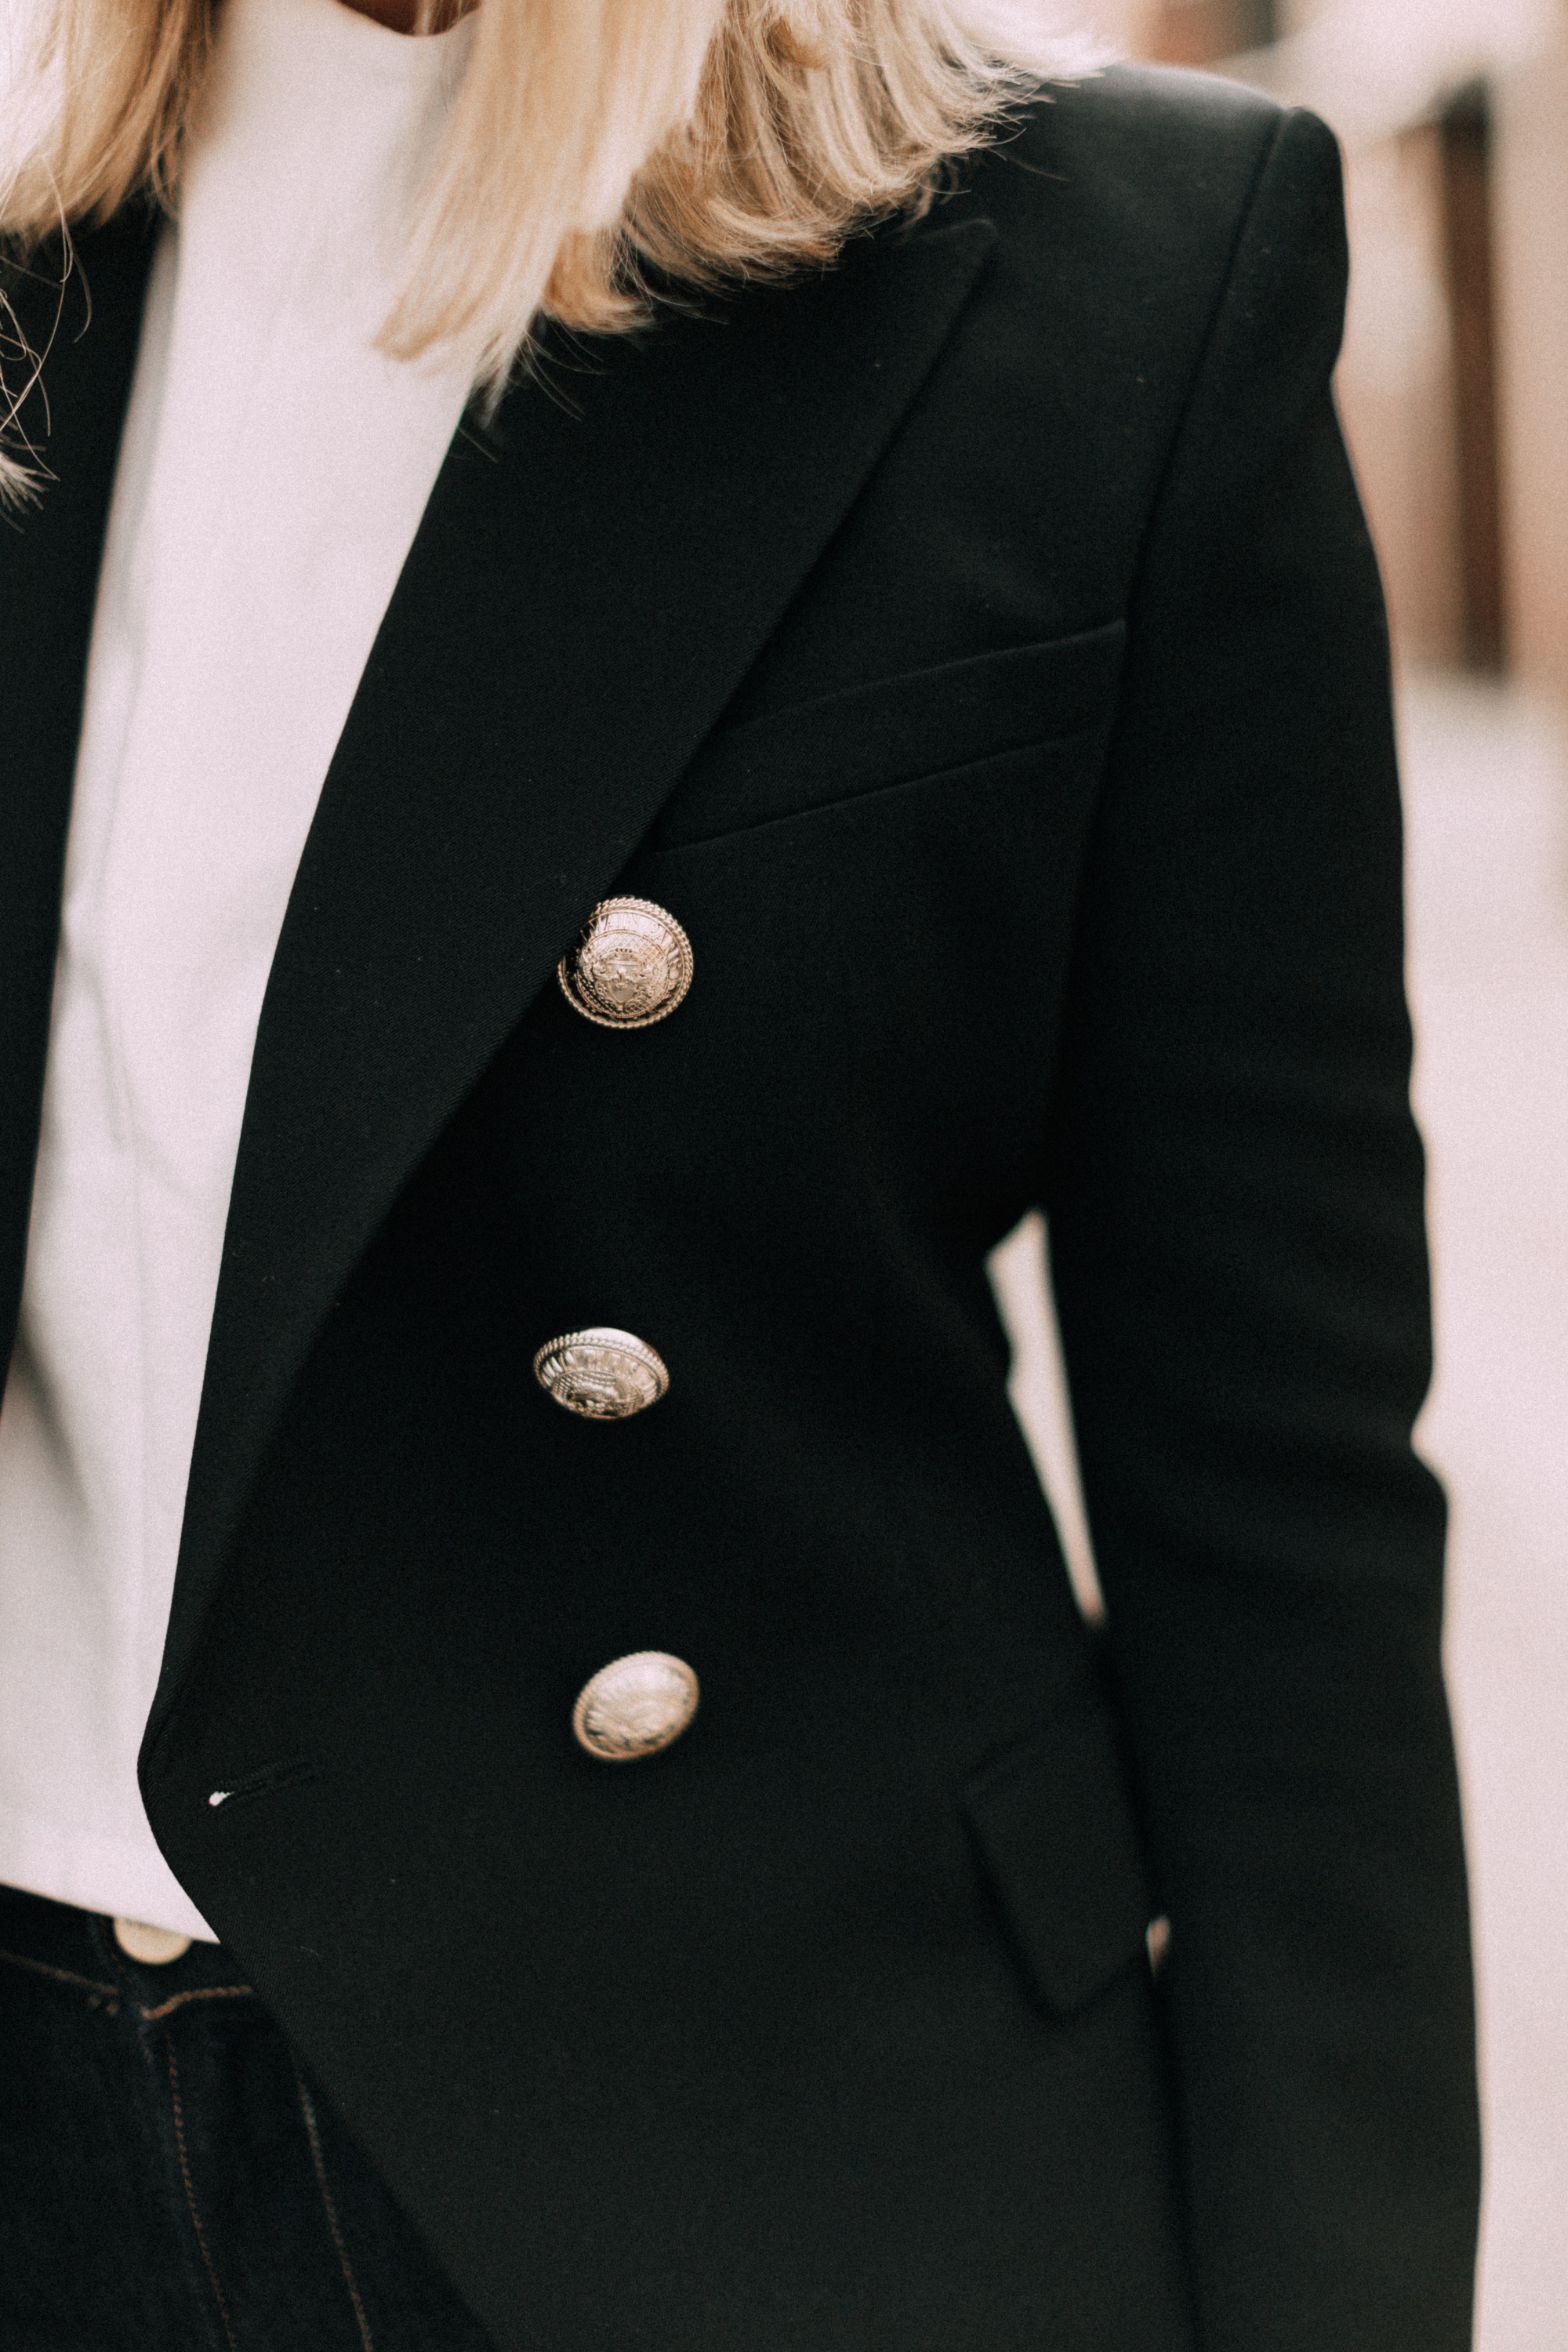 black Balmain blazer with gold buttons outfit worn with white top